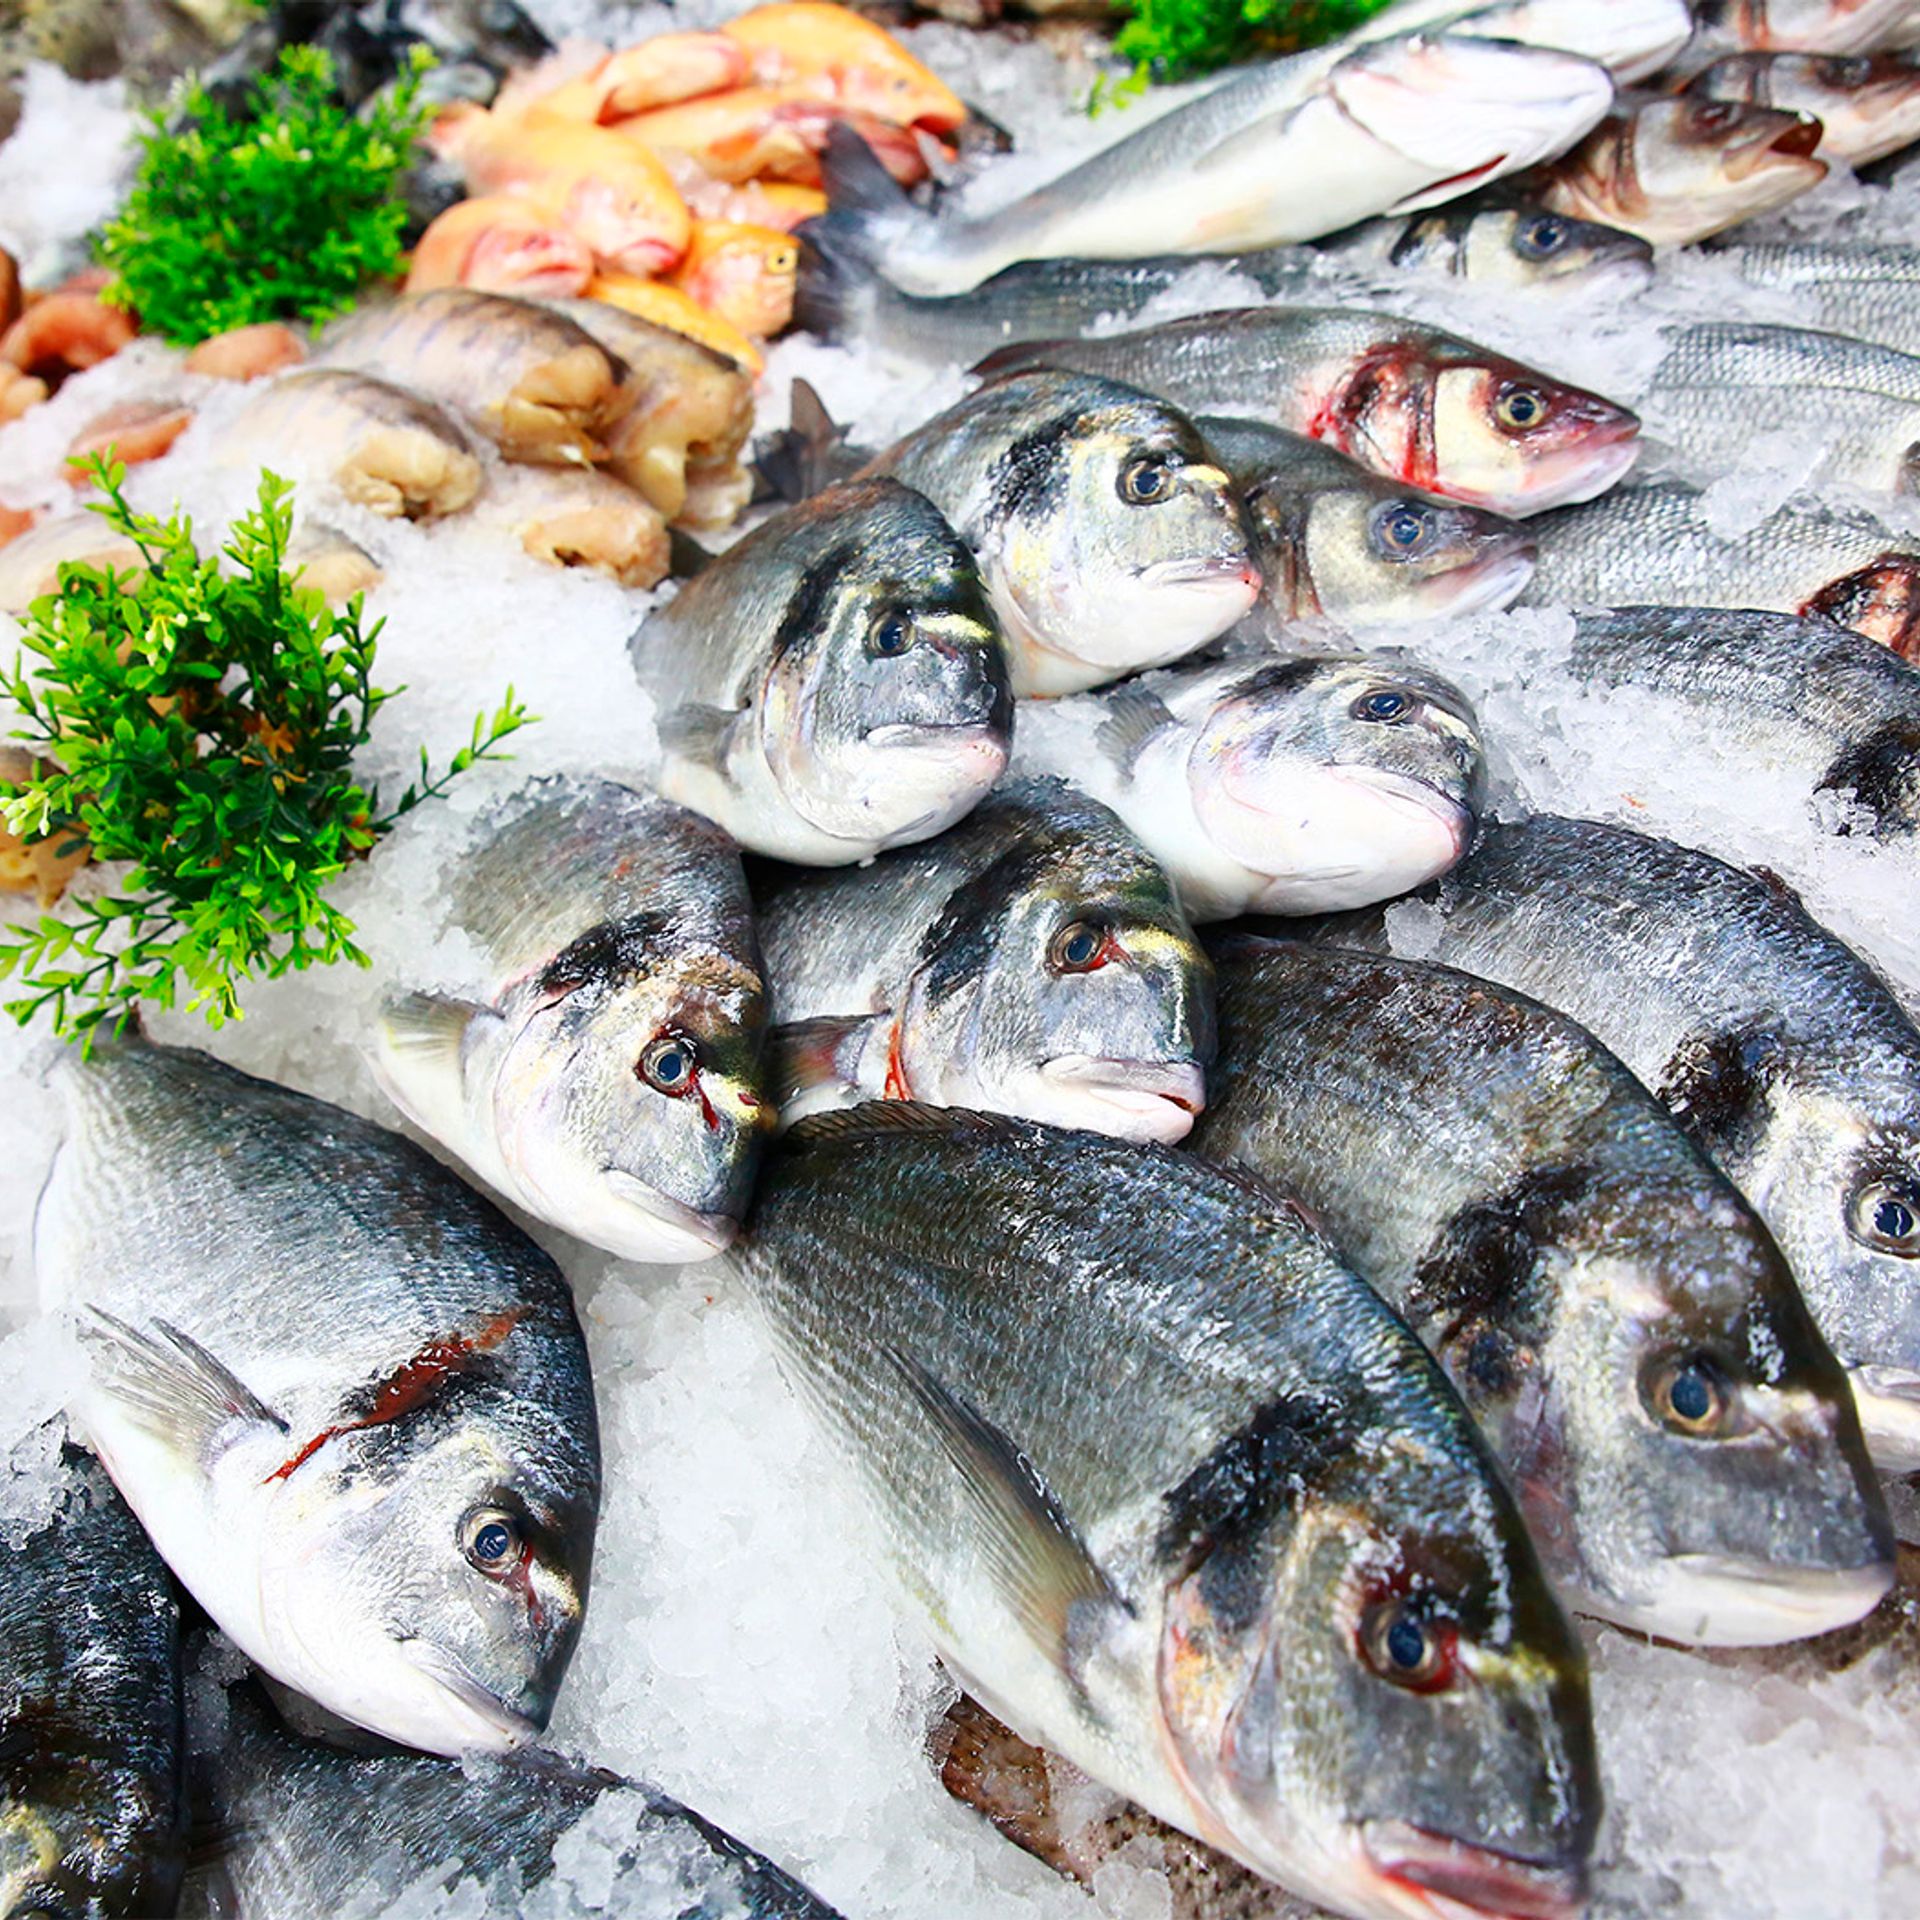 Image of a fresh fish counter in a retail store